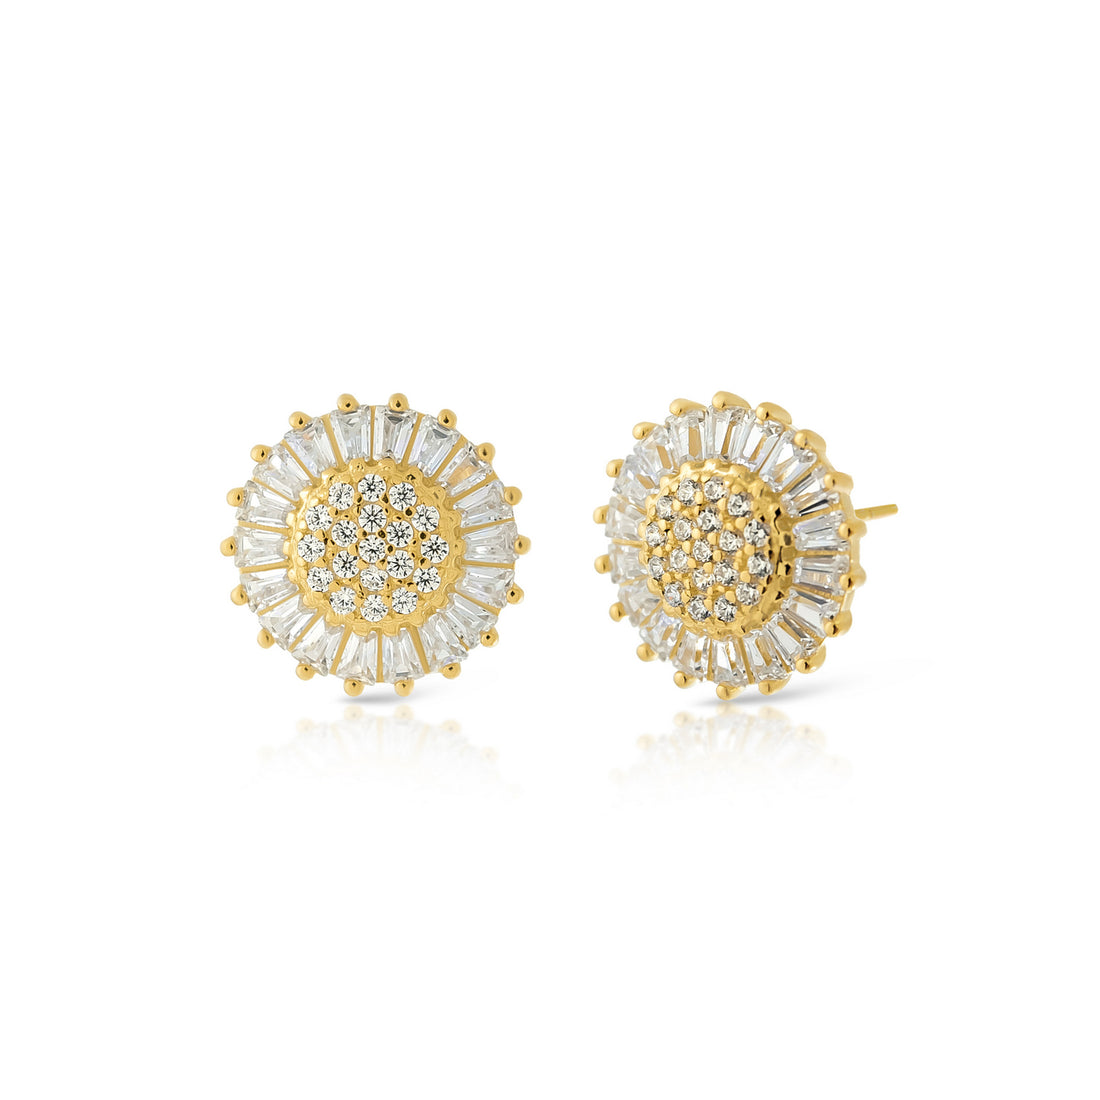 Exquisite Silver Sunflower Stud Earrings with Cubic Zircon Accents